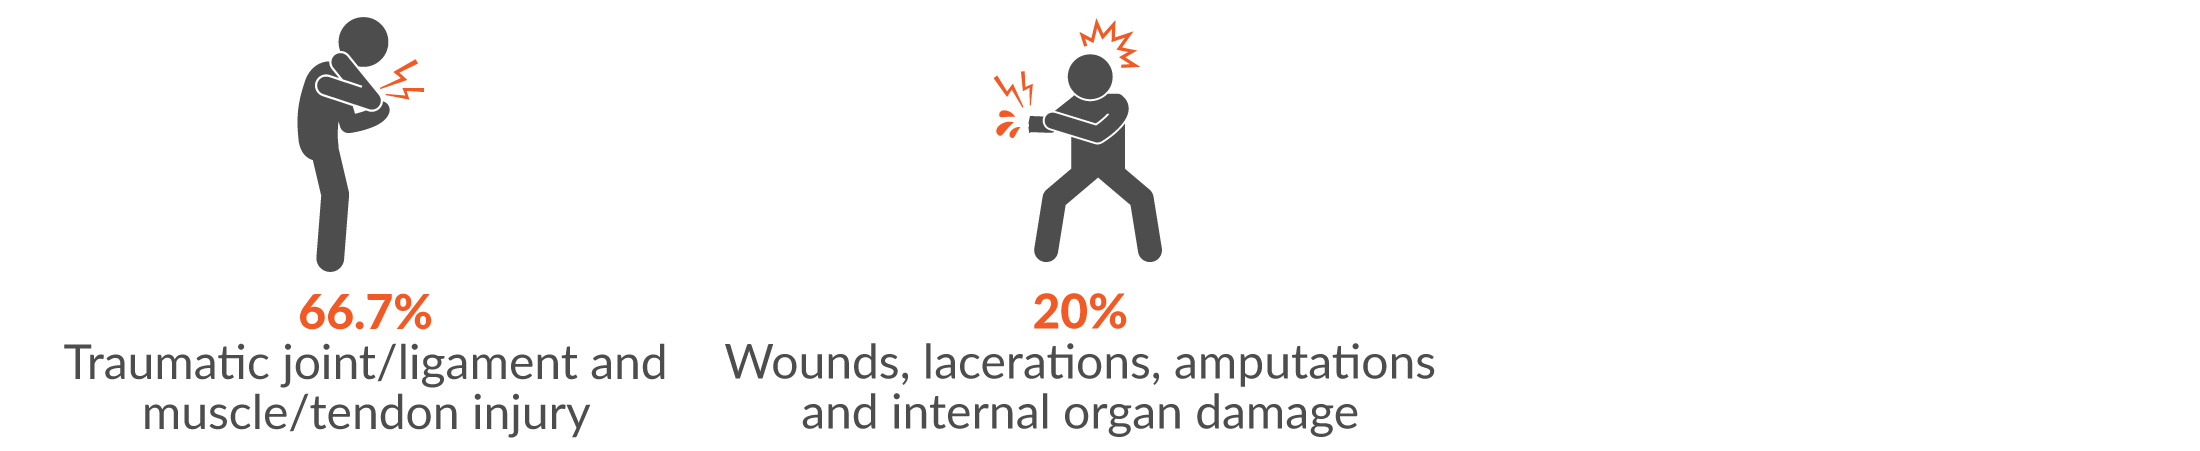 66.7% traumatic joint/ligament and muscle/tendon injury; and 20% Wounds, lacerations, amputations and internal organ damage.